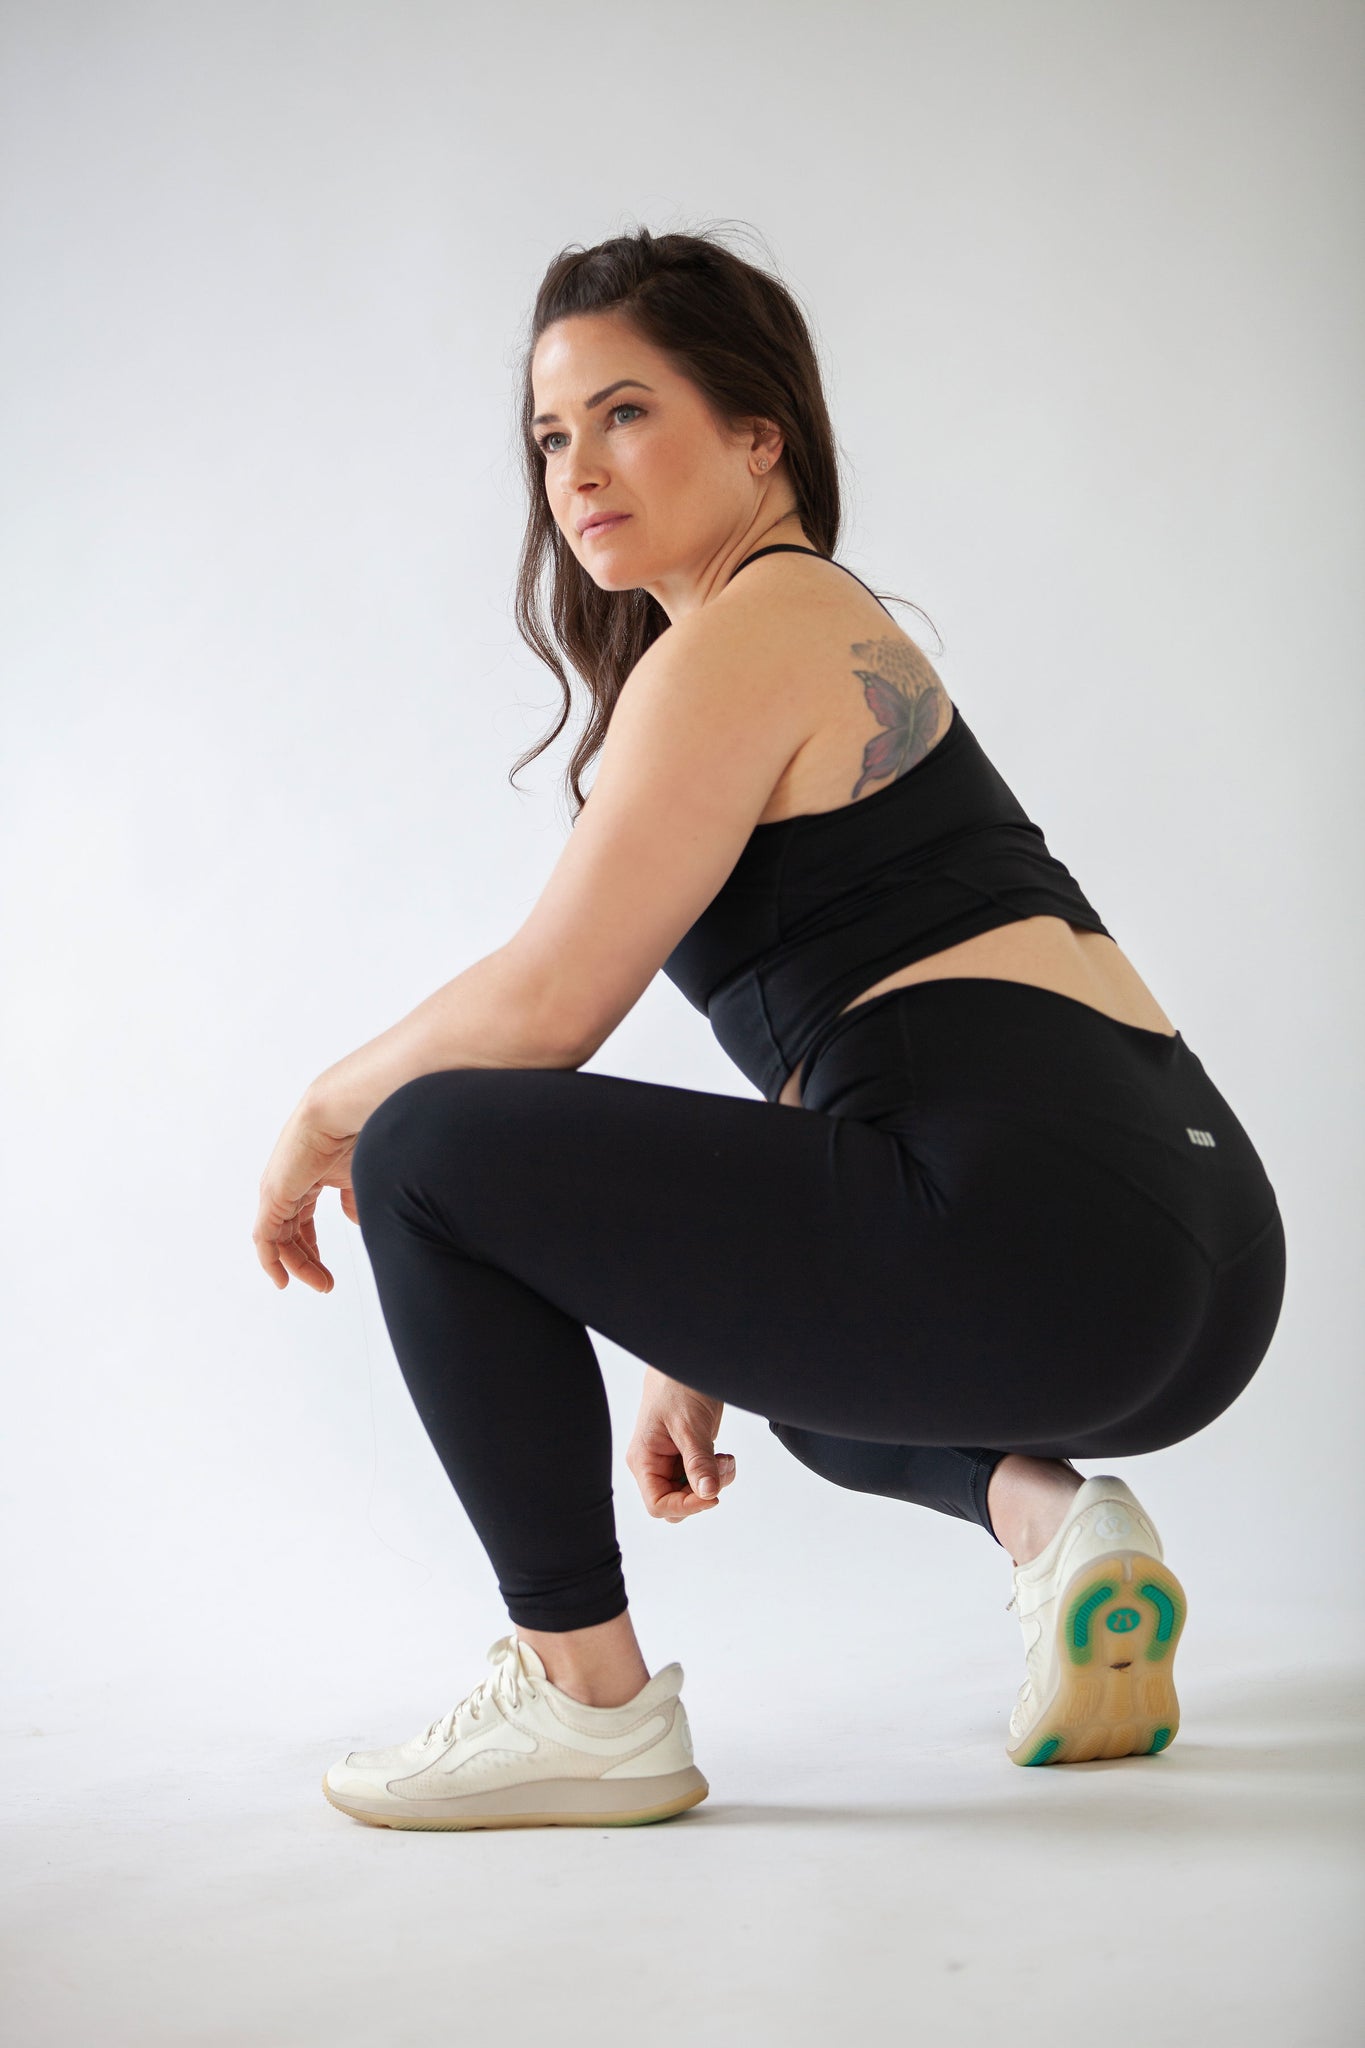 Threadbare Fitness gym leggings with stitch detail in black